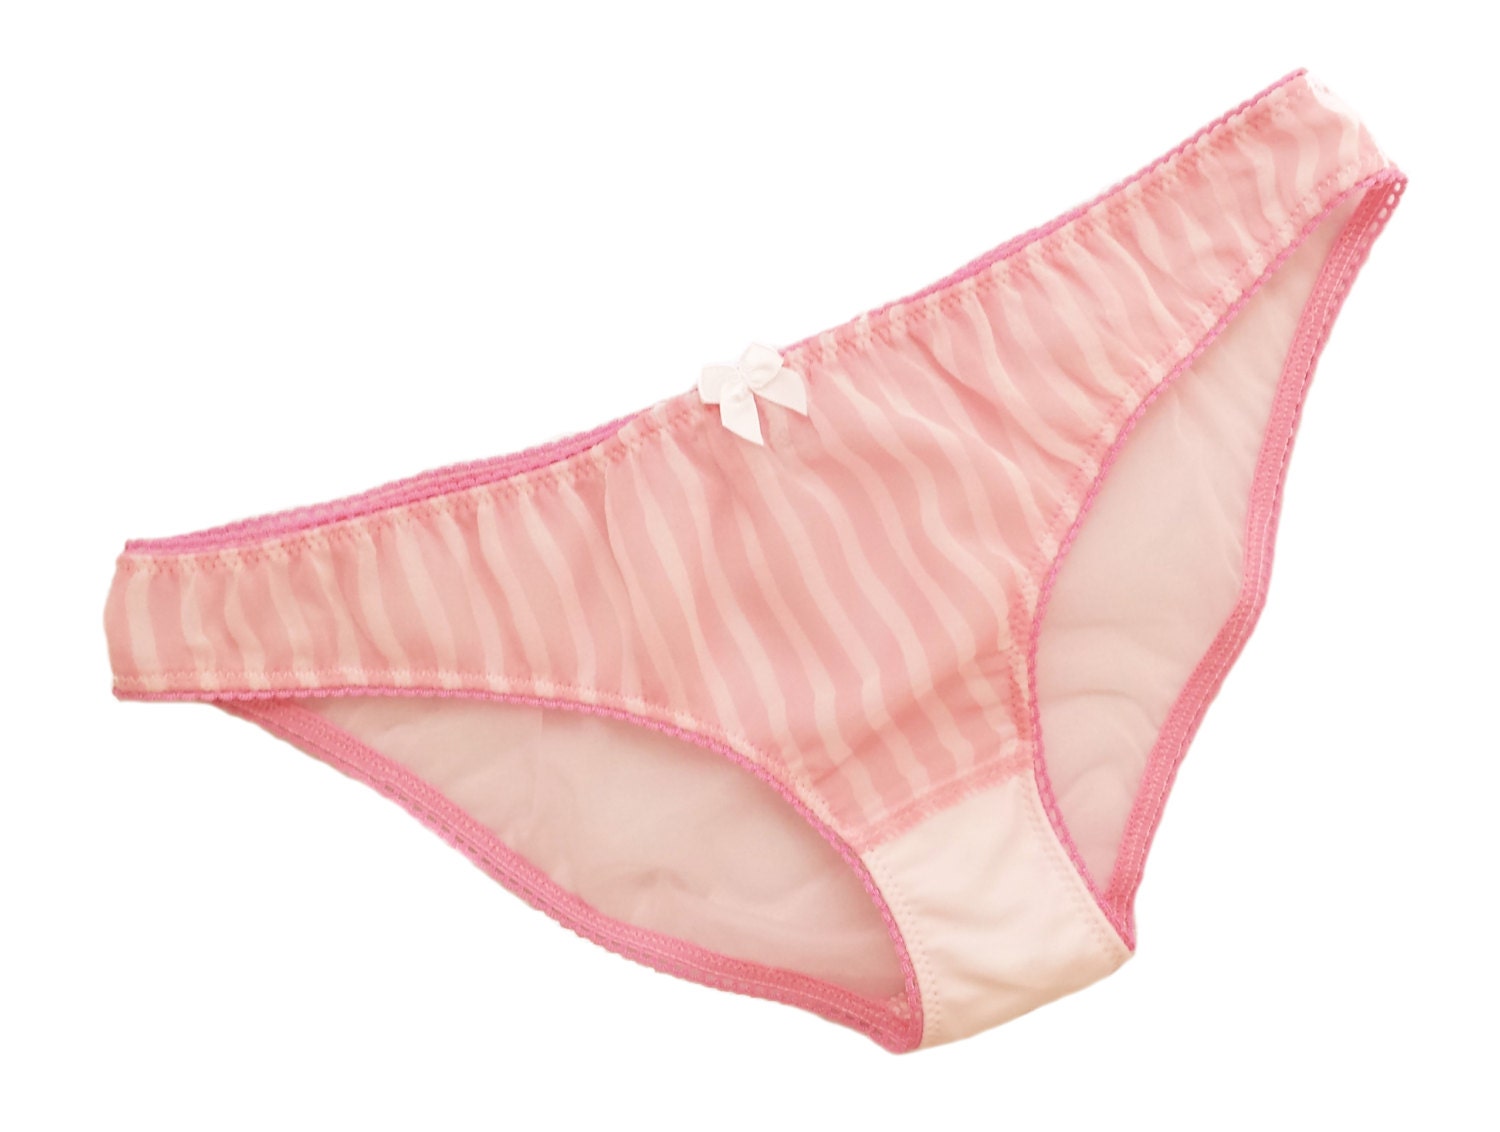 Lily Panties In Striped Pink And White Silk Chiffon Sheer